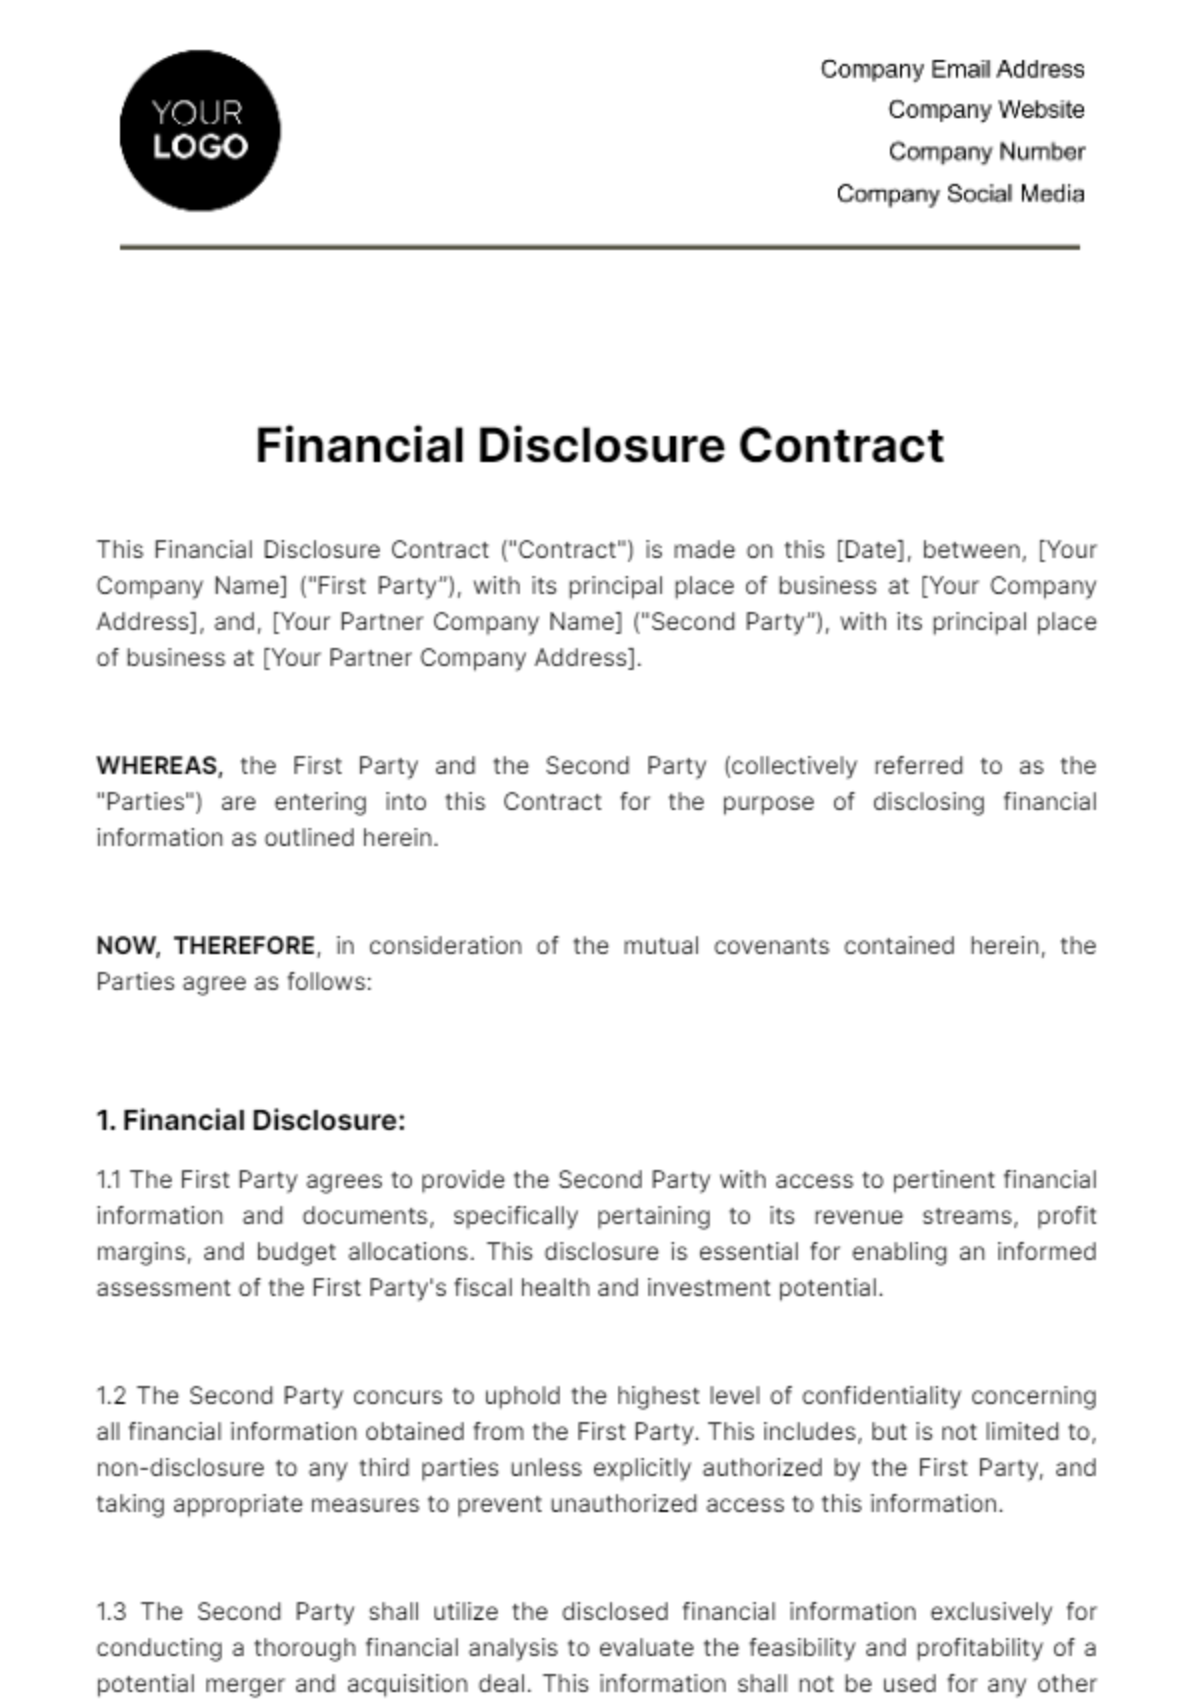 Financial Disclosure Contract Template